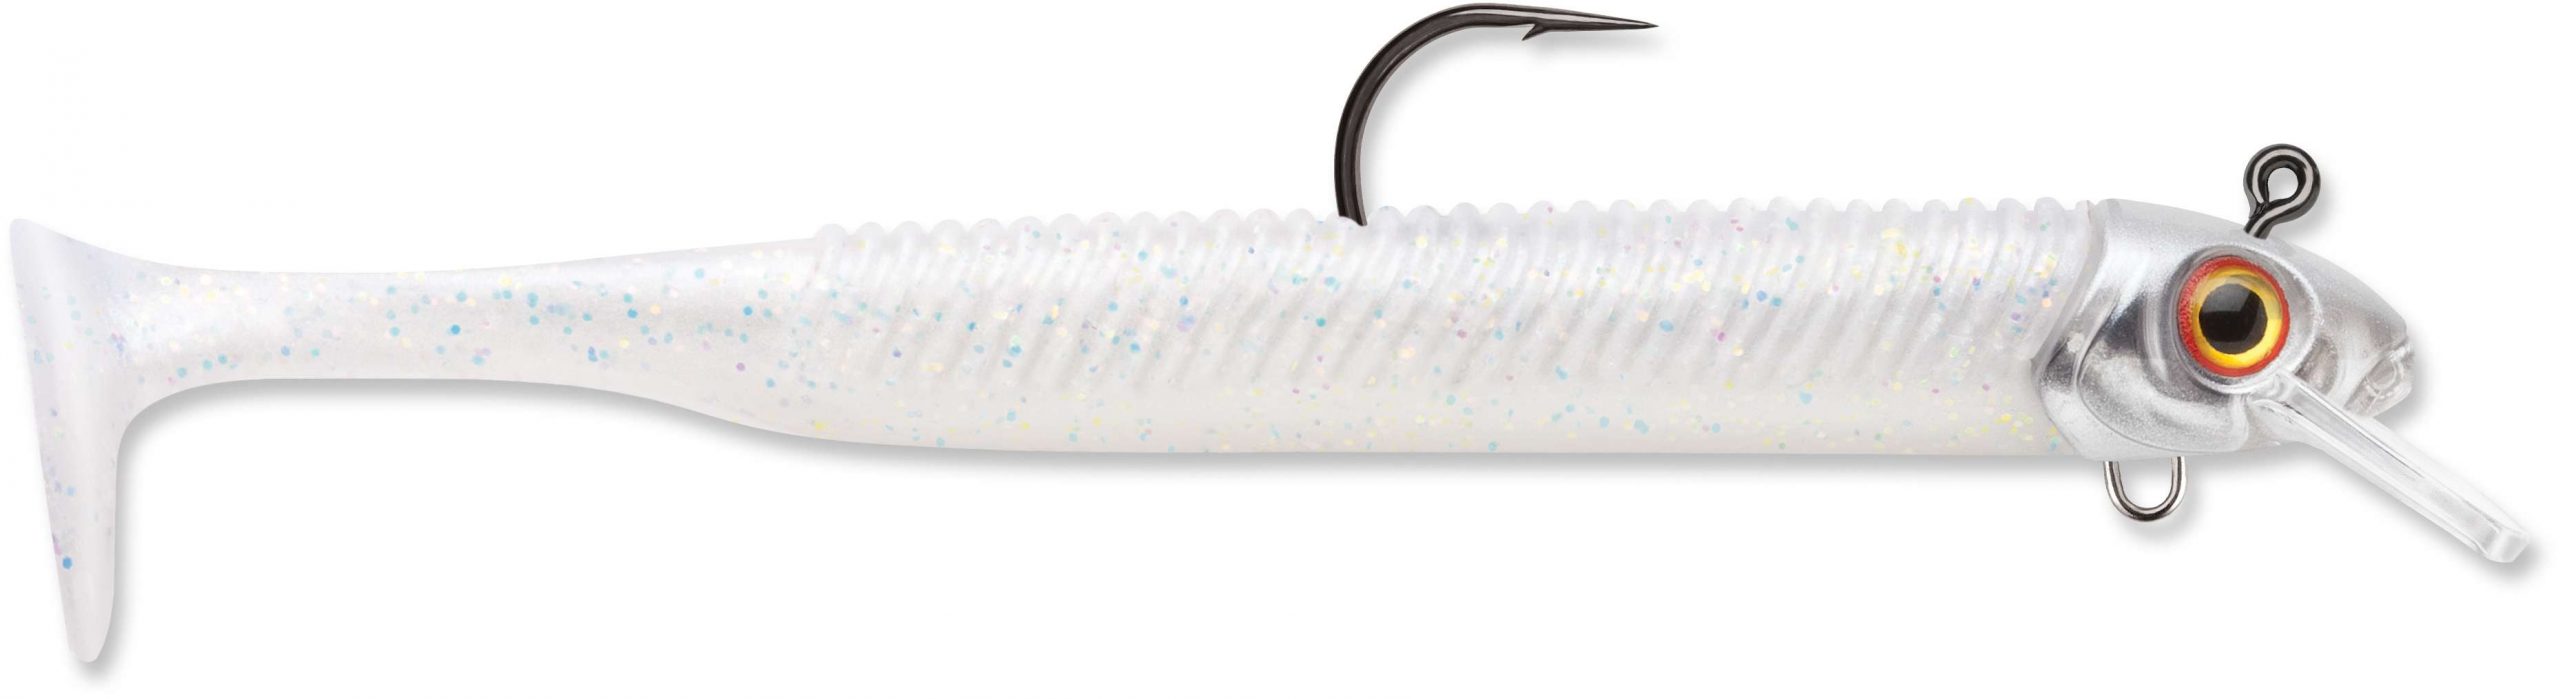 360GT Swimmer<Br>
Storm<br>
$5.49<br>
This new swimbait has a molded diving lip that adds a crankbait action and depth control. Exclusive VMC hook with extended âlegâ on line tie to further enhance the action. A 60-degree angle keeps the lure swimming perfectly and a life-like rattling jig head provides an un-rivaled presentation. The Swimmer jig head has an optional hanger on the bottom which allows customization with stinger hooks or blades. Like all of the 360GT bodies, the 360GT Searchbait Swimmer has entry and exit marks for the hook which make it the easiest swimbait to rig perfectly every time. Each package contains a pre-rigged Swimmer with 2 extra bodies.
